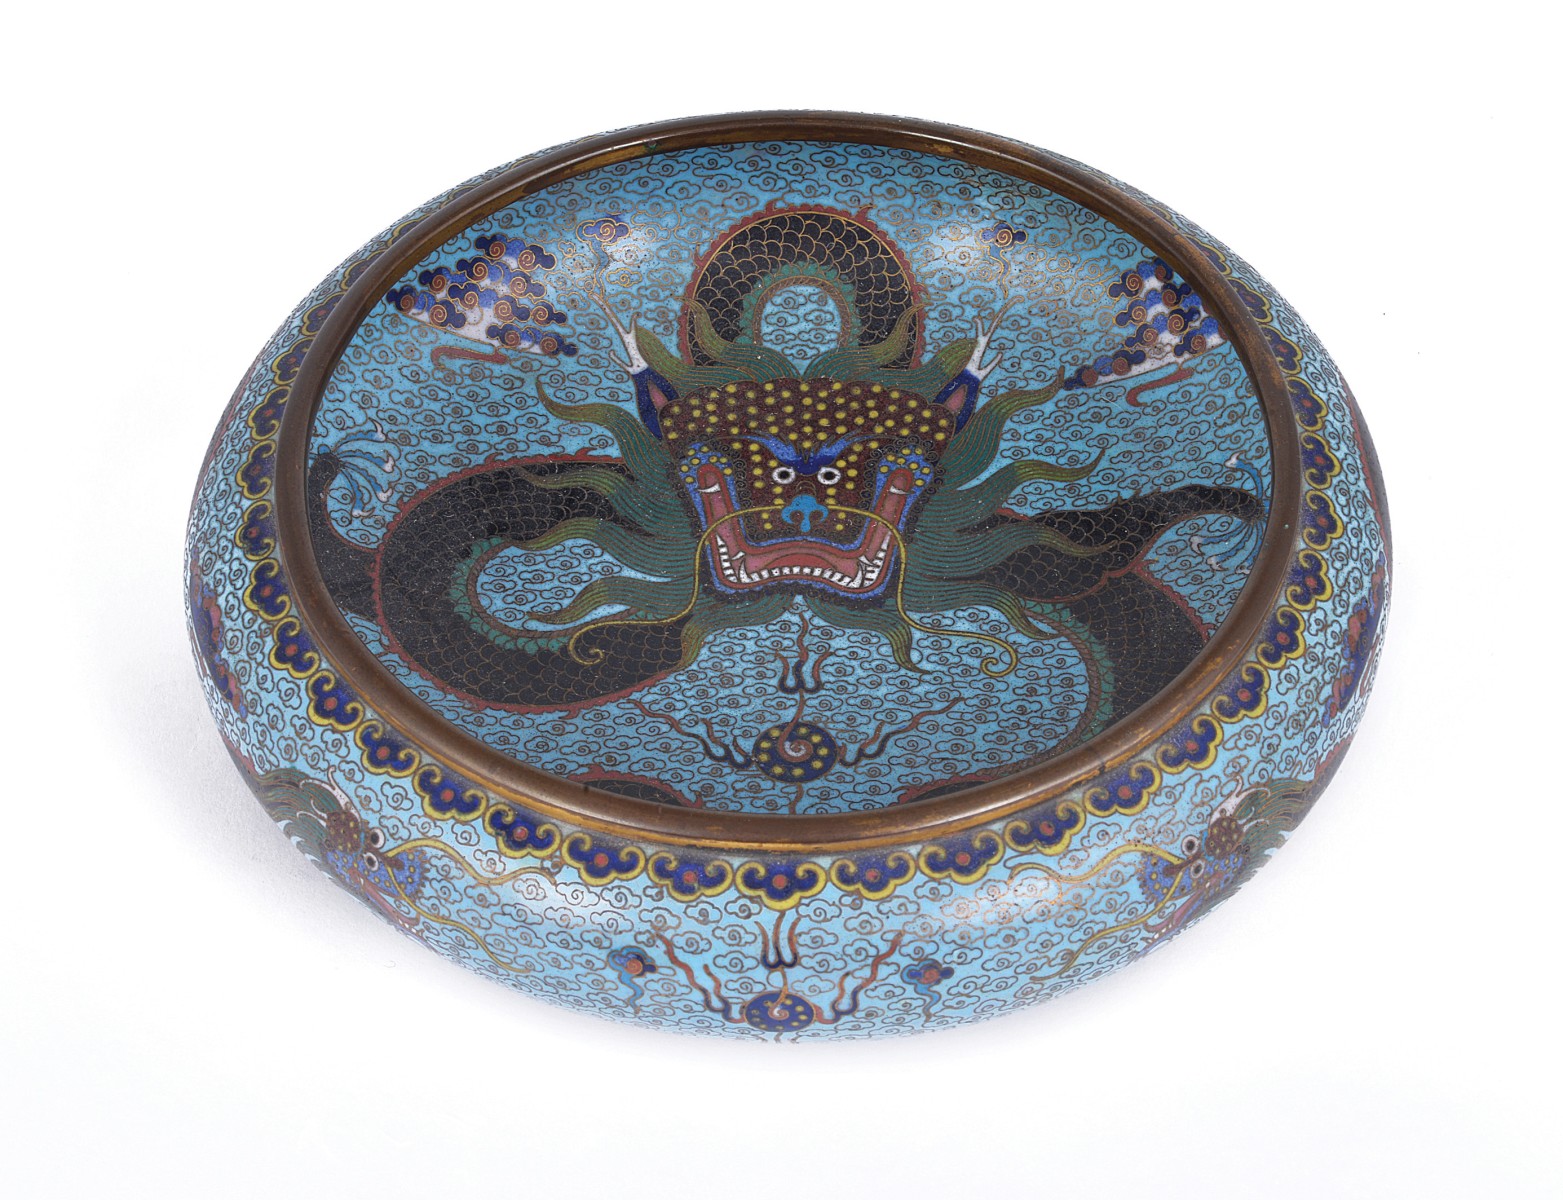 A CHINESE CLOISONNÉ DRAGON BOWL, LATE QING the inside decorated with a central dragon coiled